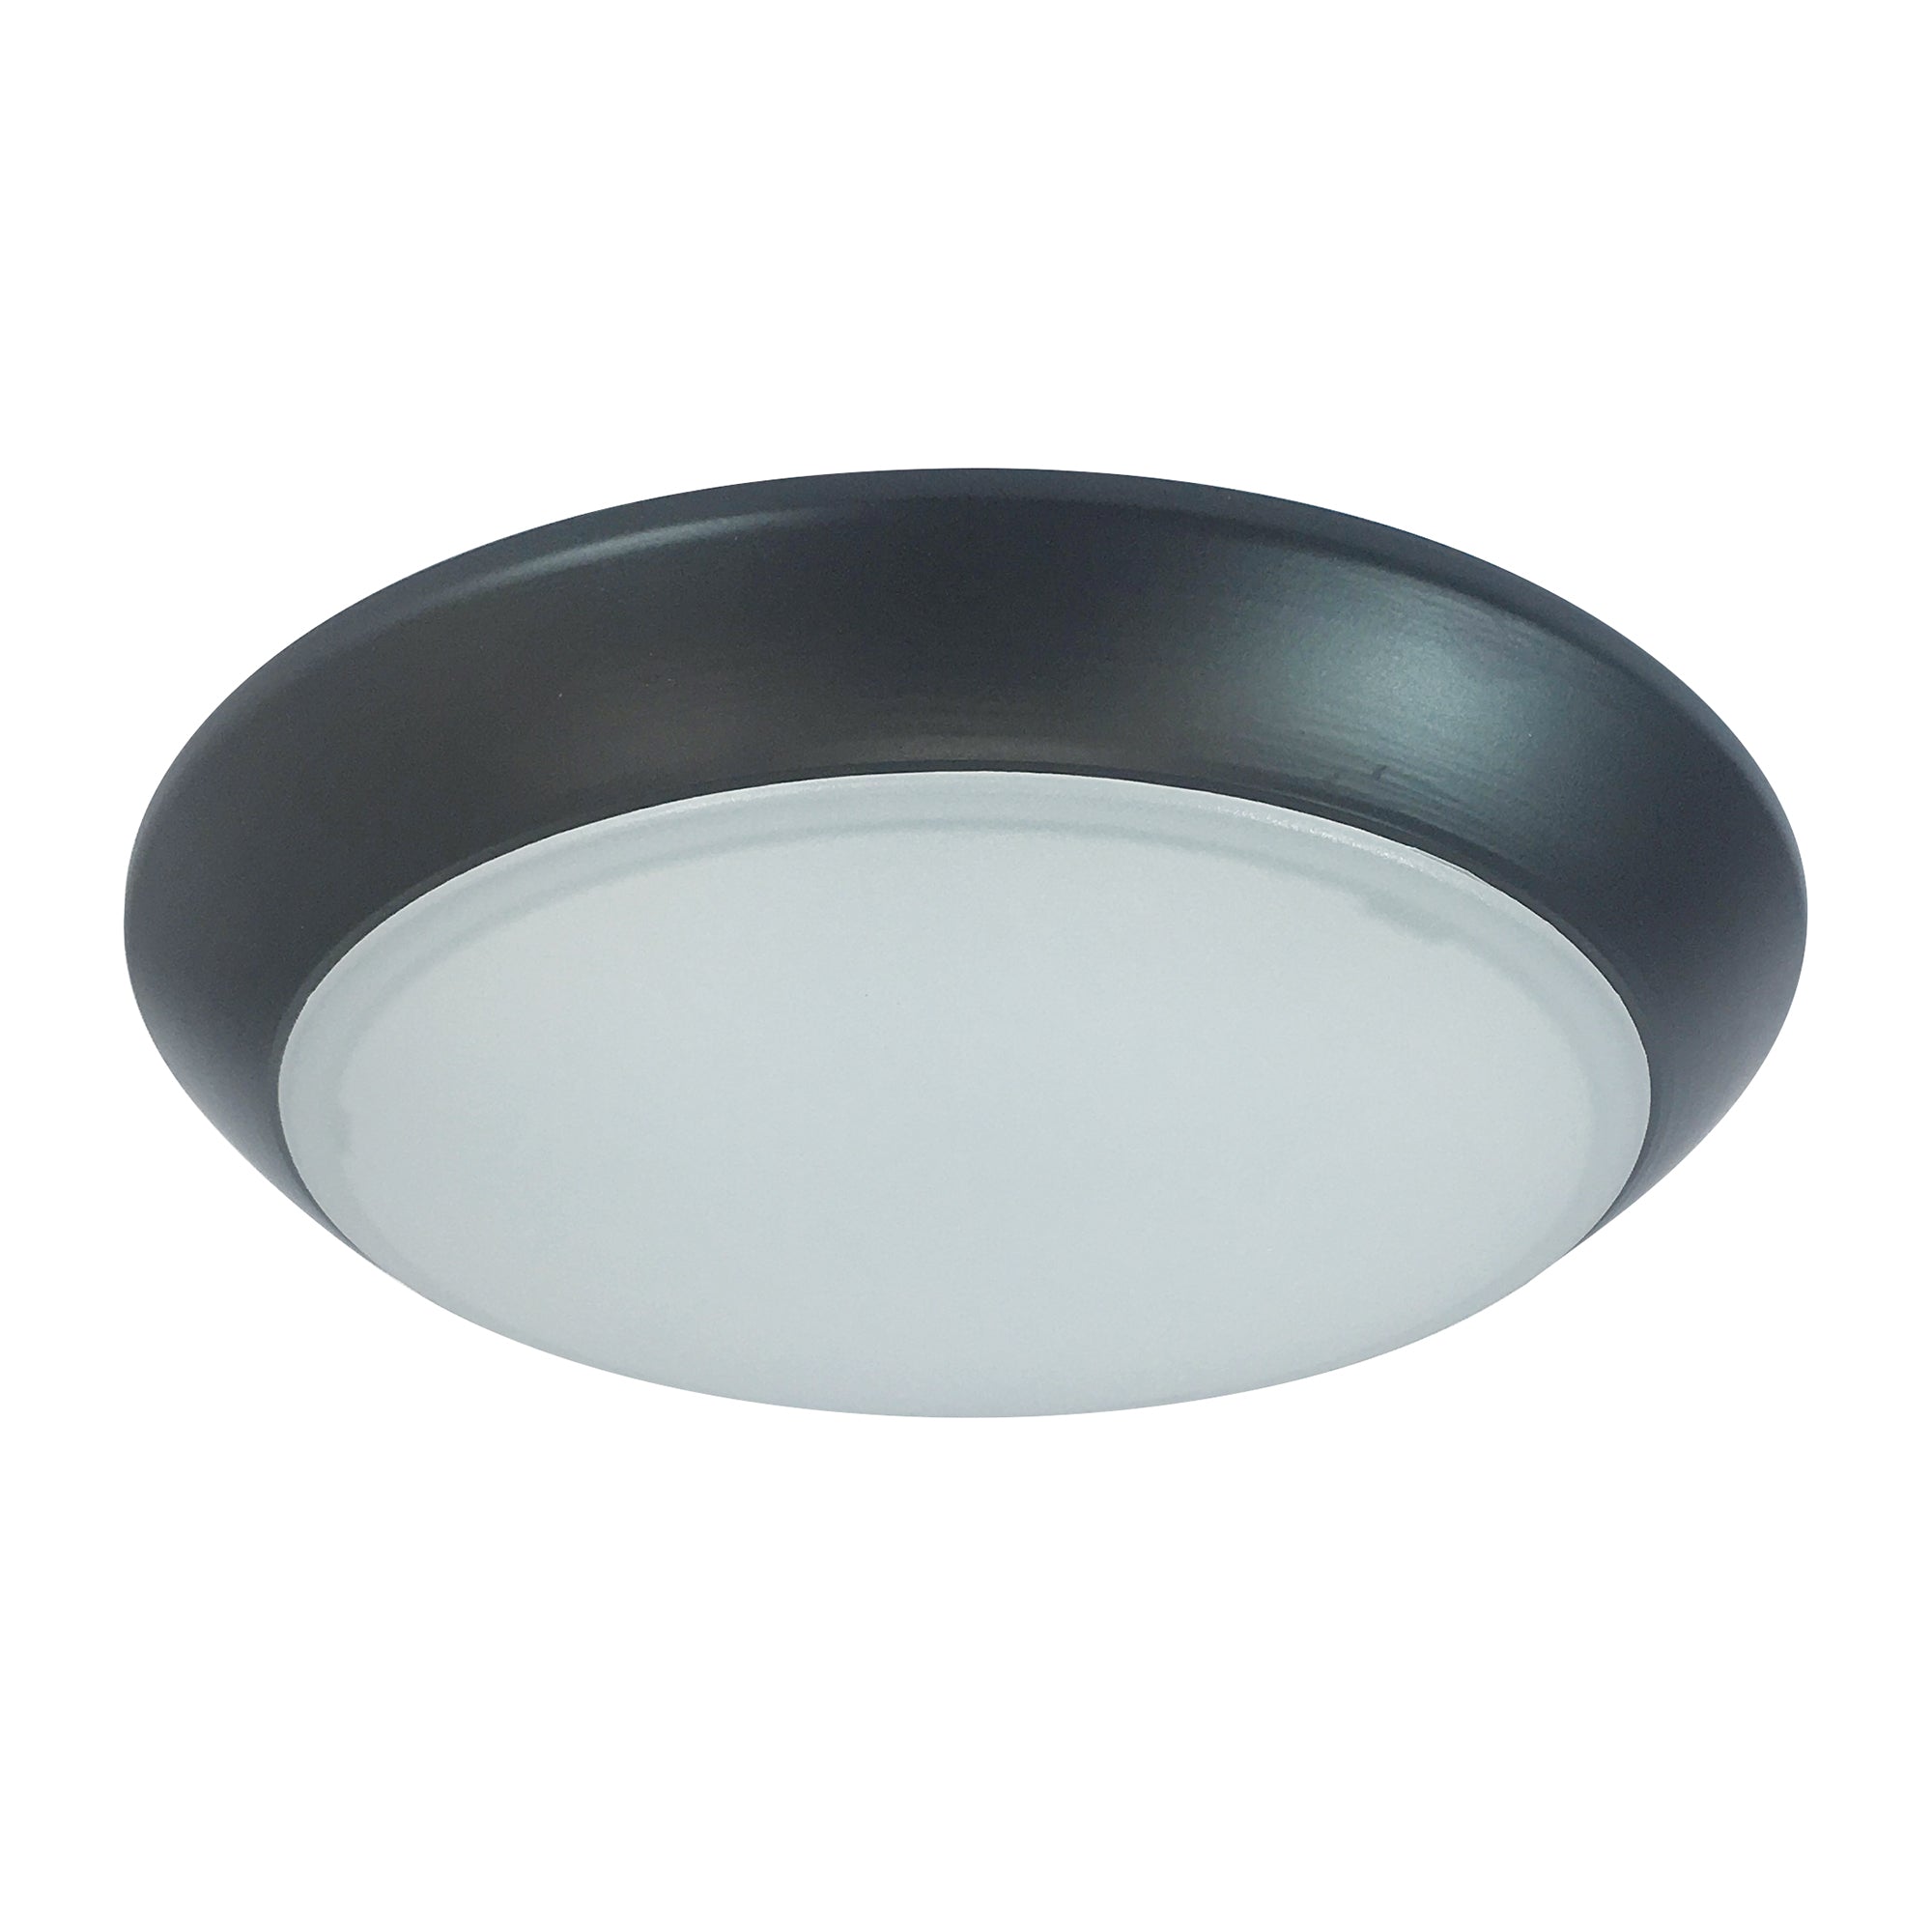 Nora Lighting NLOPAC-R8T2440BZ - Surface - 8 Inch AC Opal LED Surface Mount, 2150lm / 32W, 4000K, Bronze finish